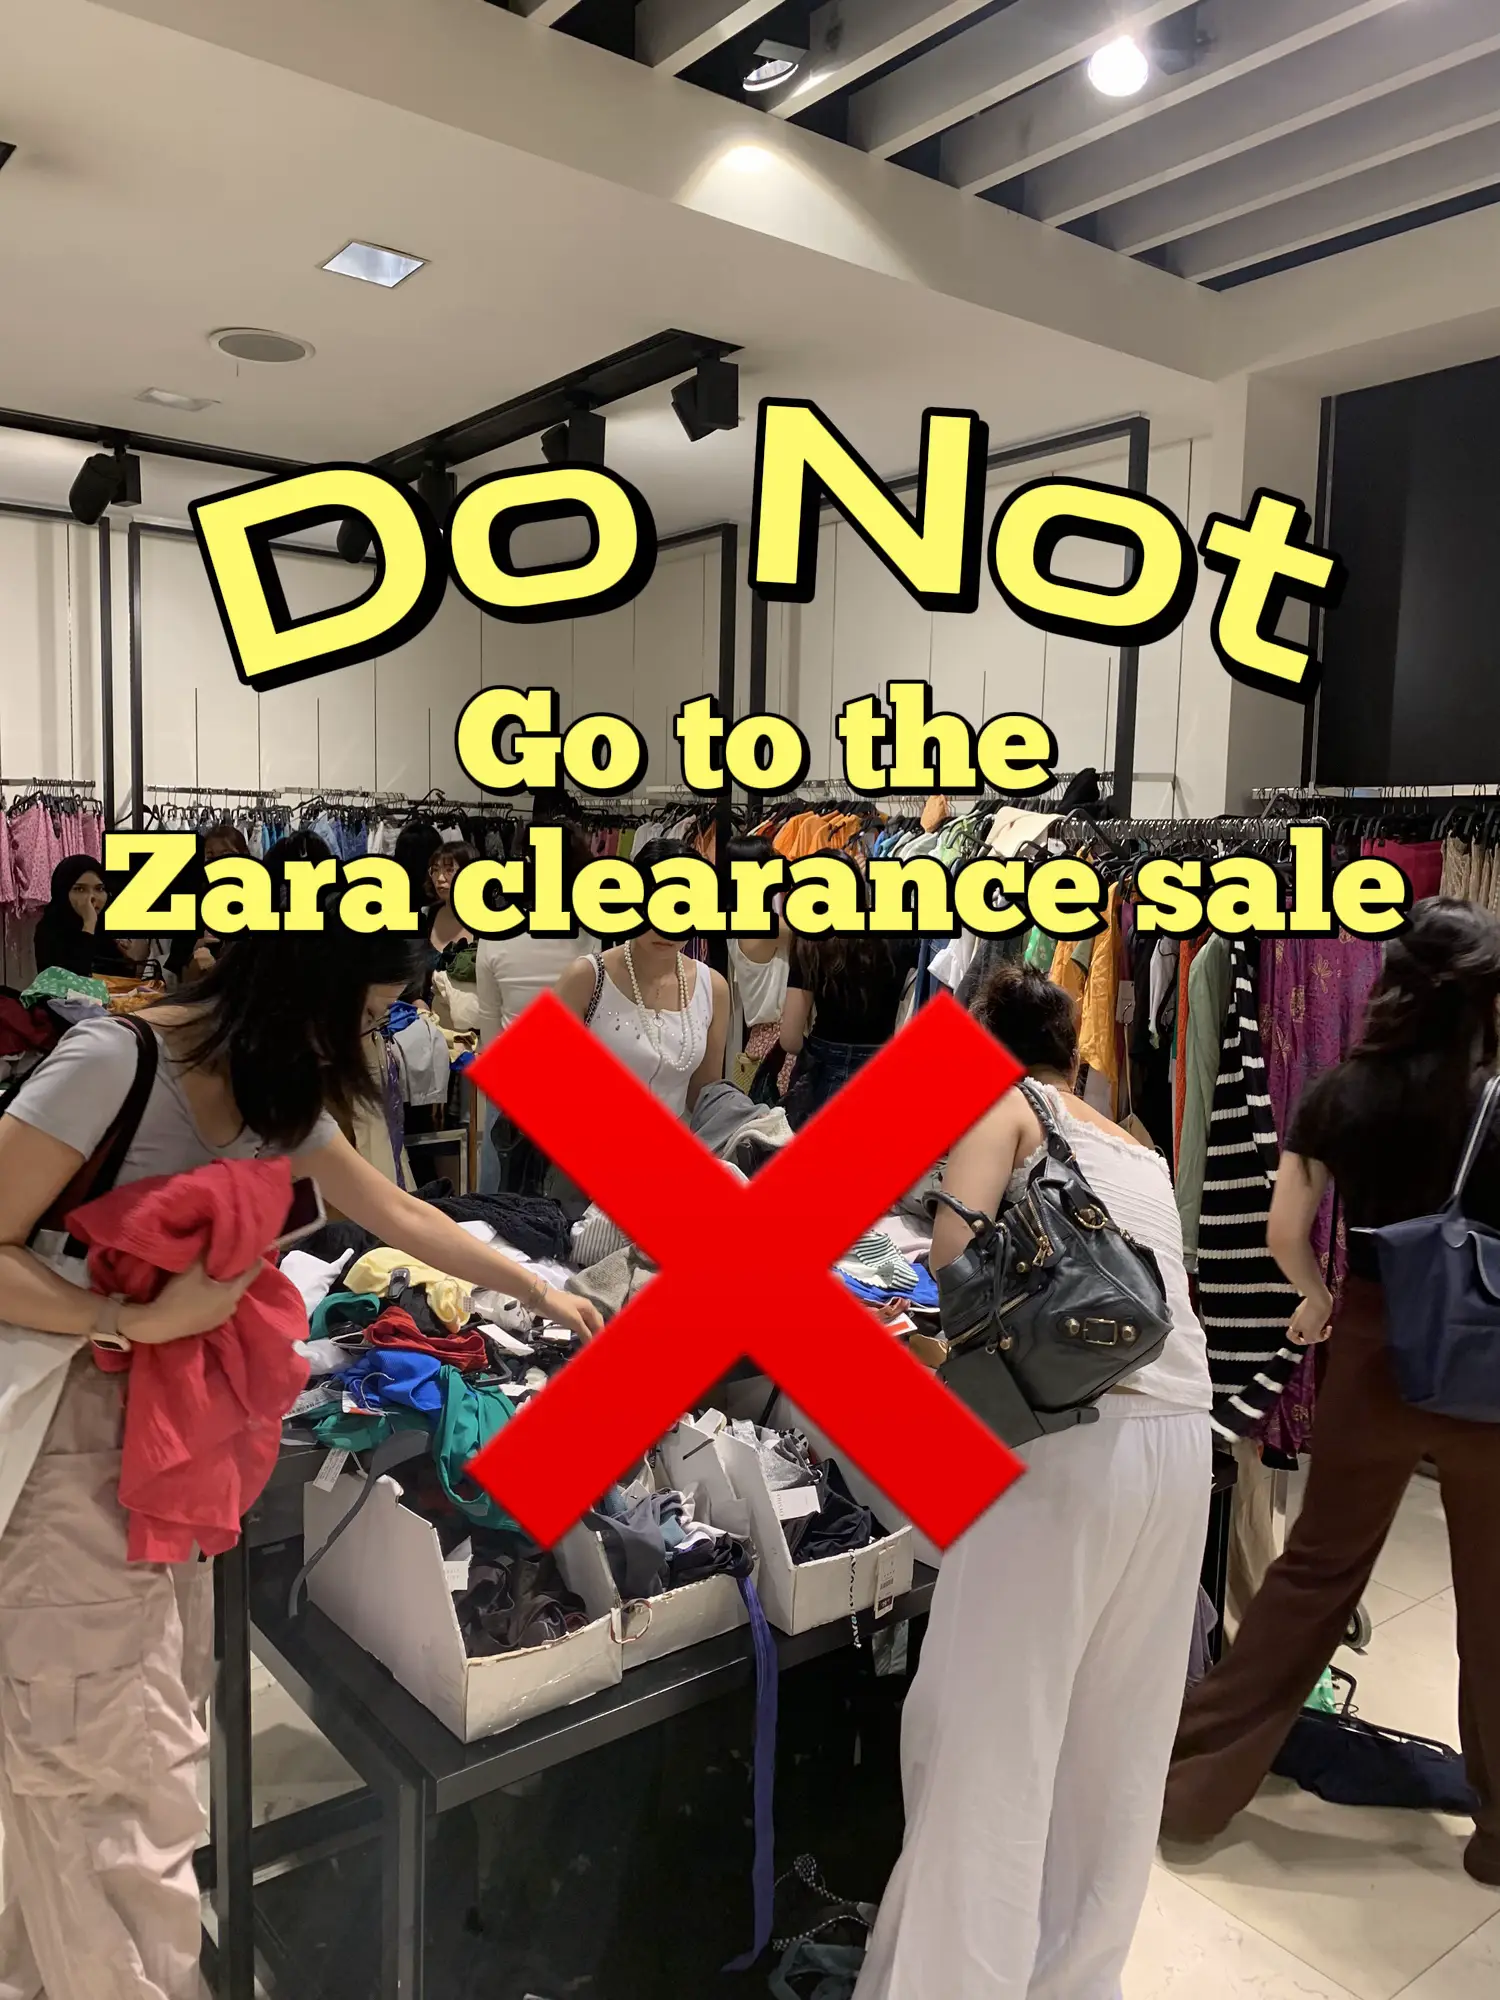 What are some websites that sell cheap clothes like ZALORA, but